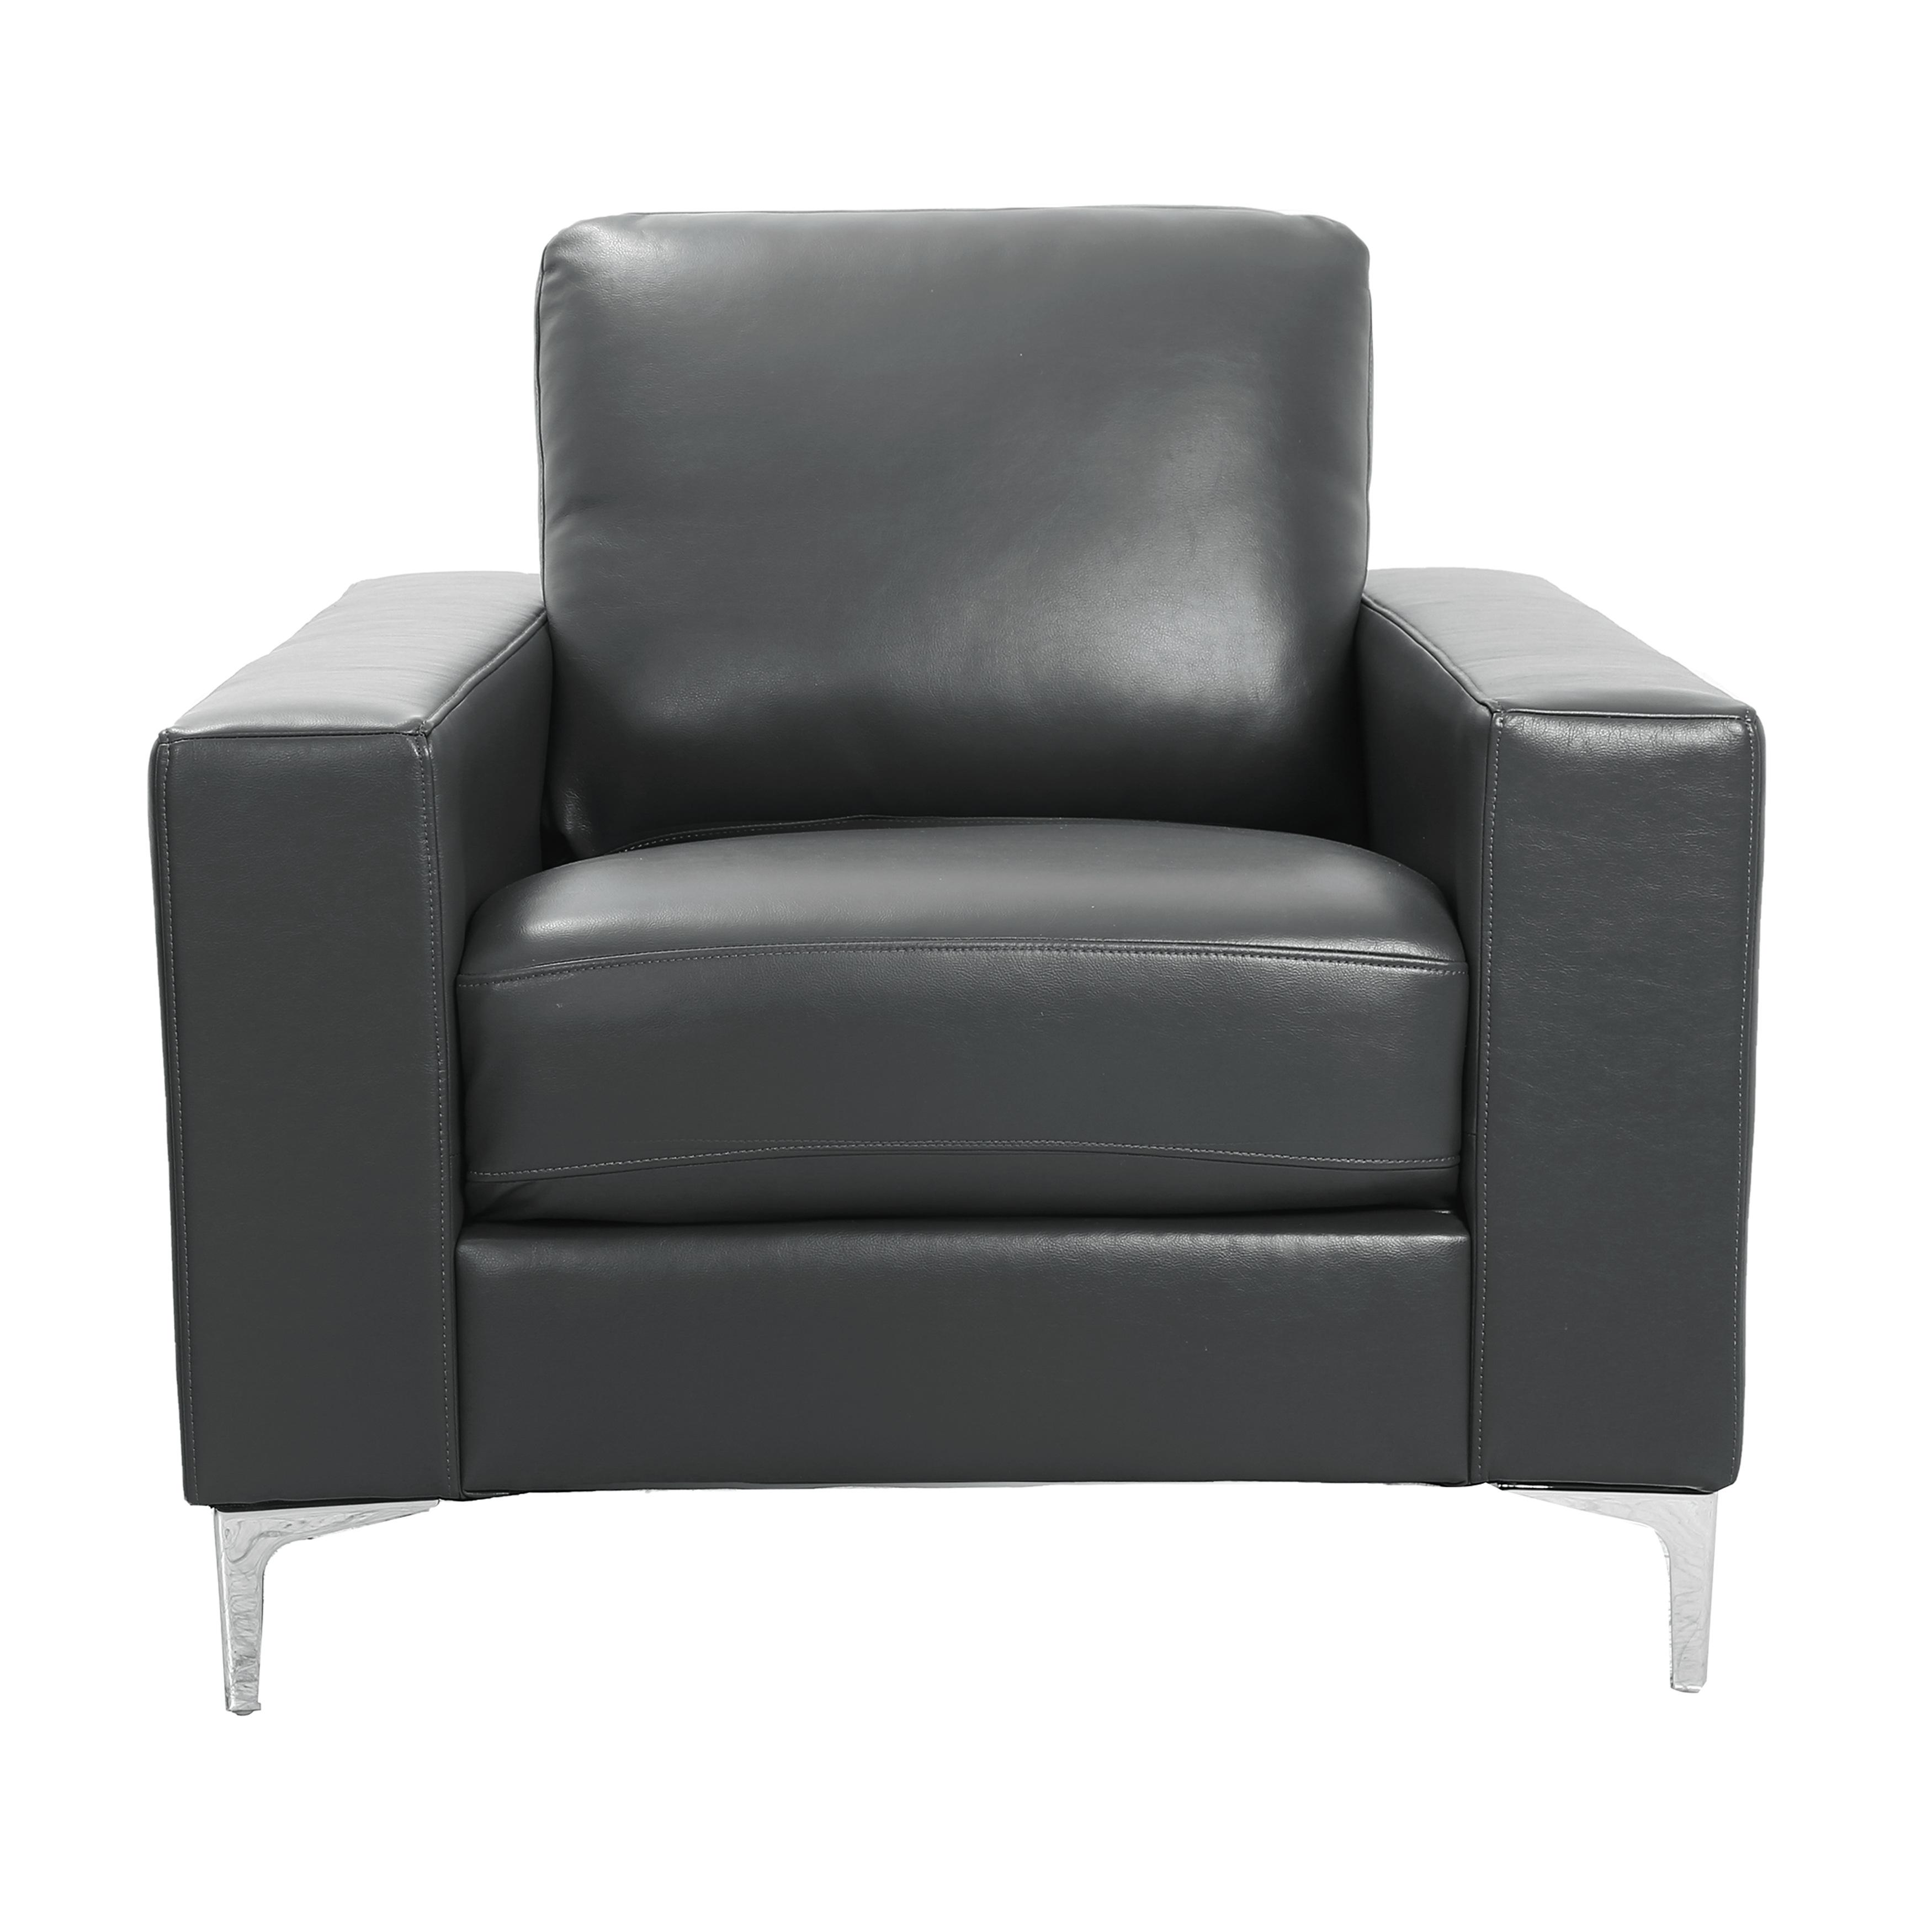 Contemporary Arm Chair 8203GY-1 Iniko 8203GY-1 in Gray Faux Leather